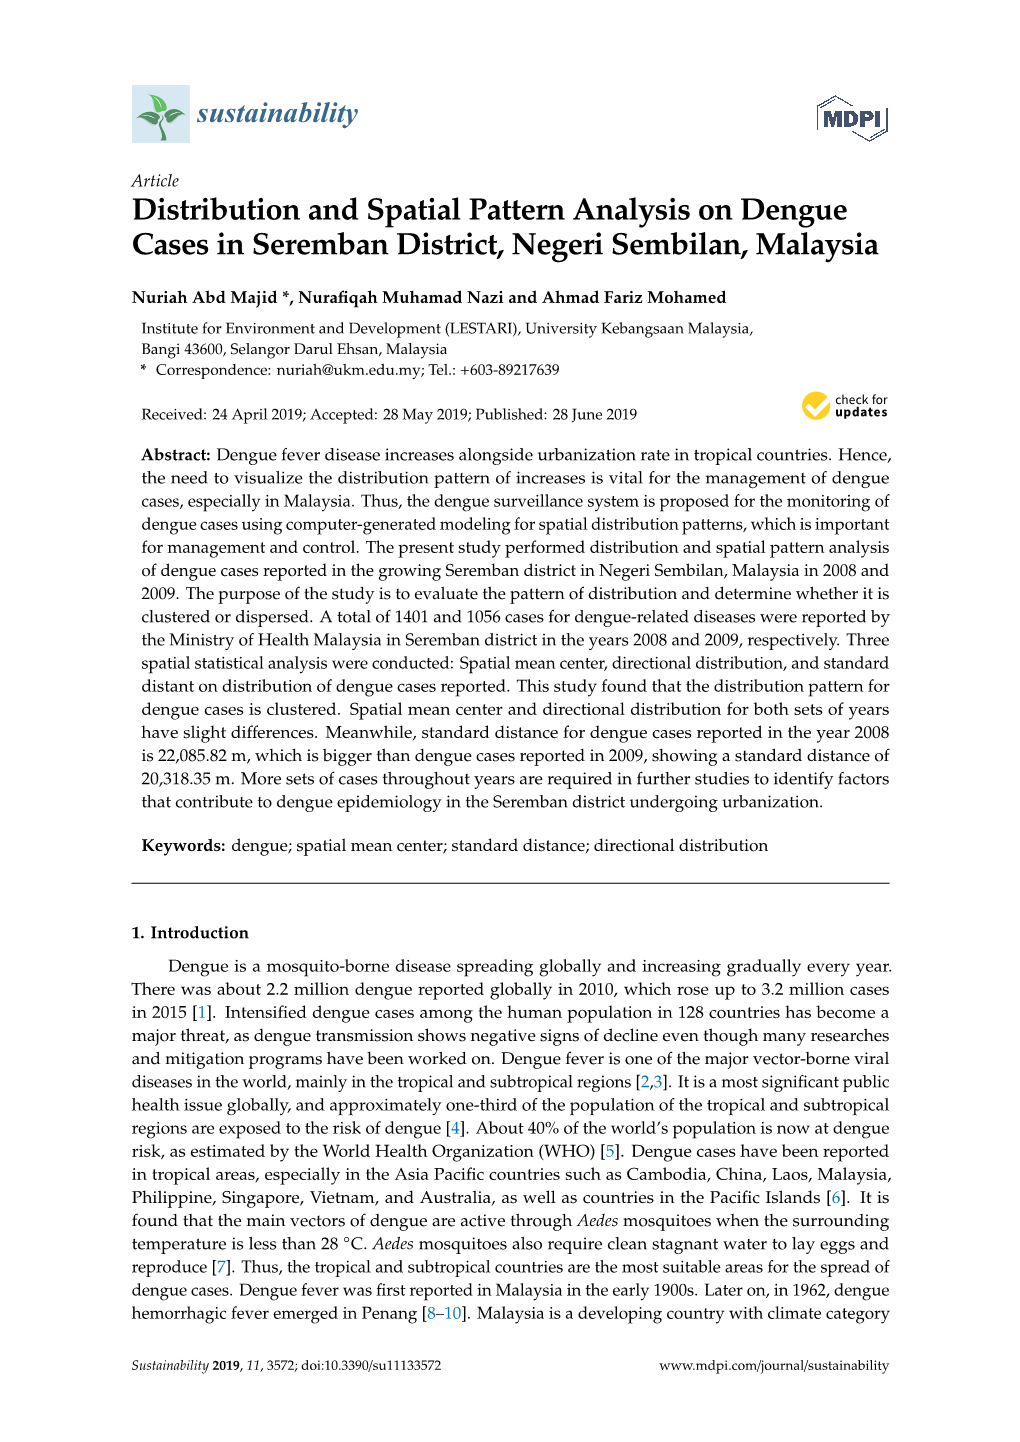 Distribution and Spatial Pattern Analysis on Dengue Cases in Seremban District, Negeri Sembilan, Malaysia